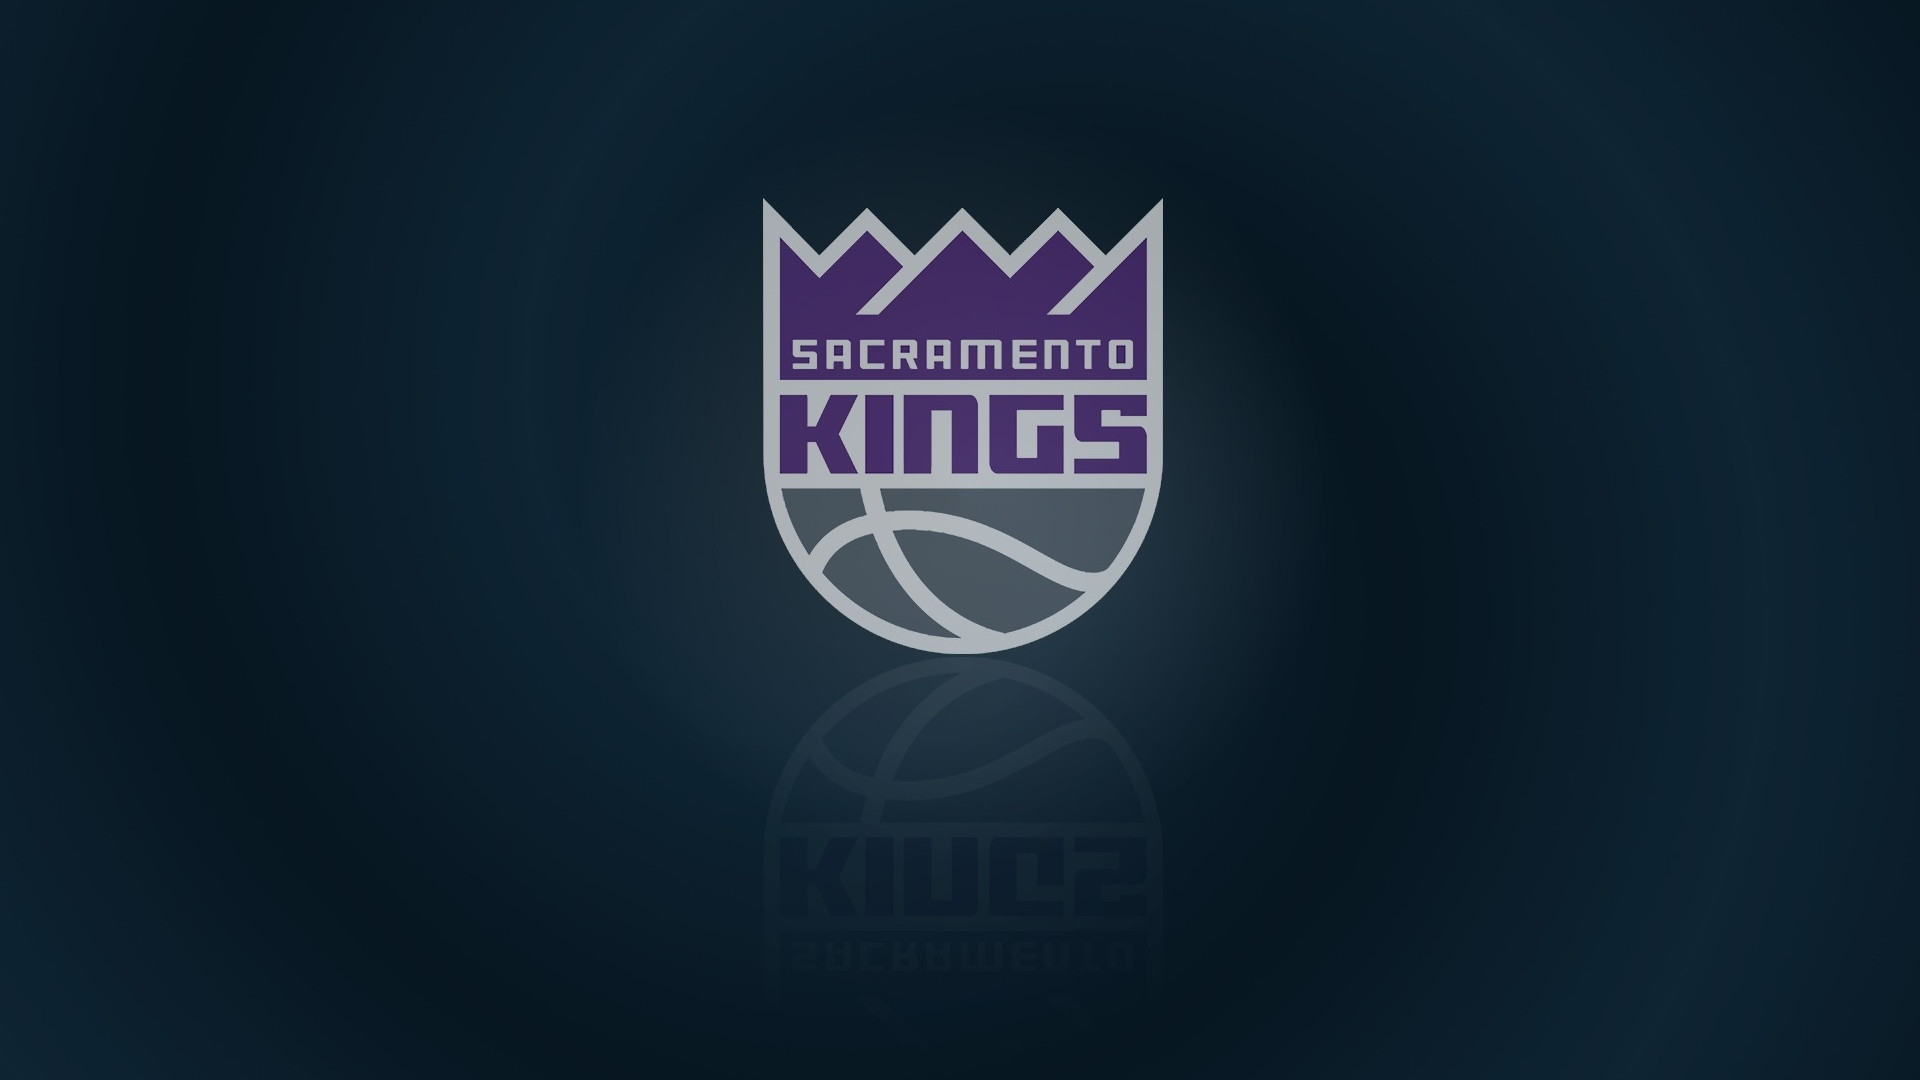 Sacramento Kings Logo Wallpaper HD with high-resolution 1920x1080 pixel. You can use this wallpaper for your Desktop Computer Backgrounds, Windows or Mac Screensavers, iPhone Lock screen, Tablet or Android and another Mobile Phone device